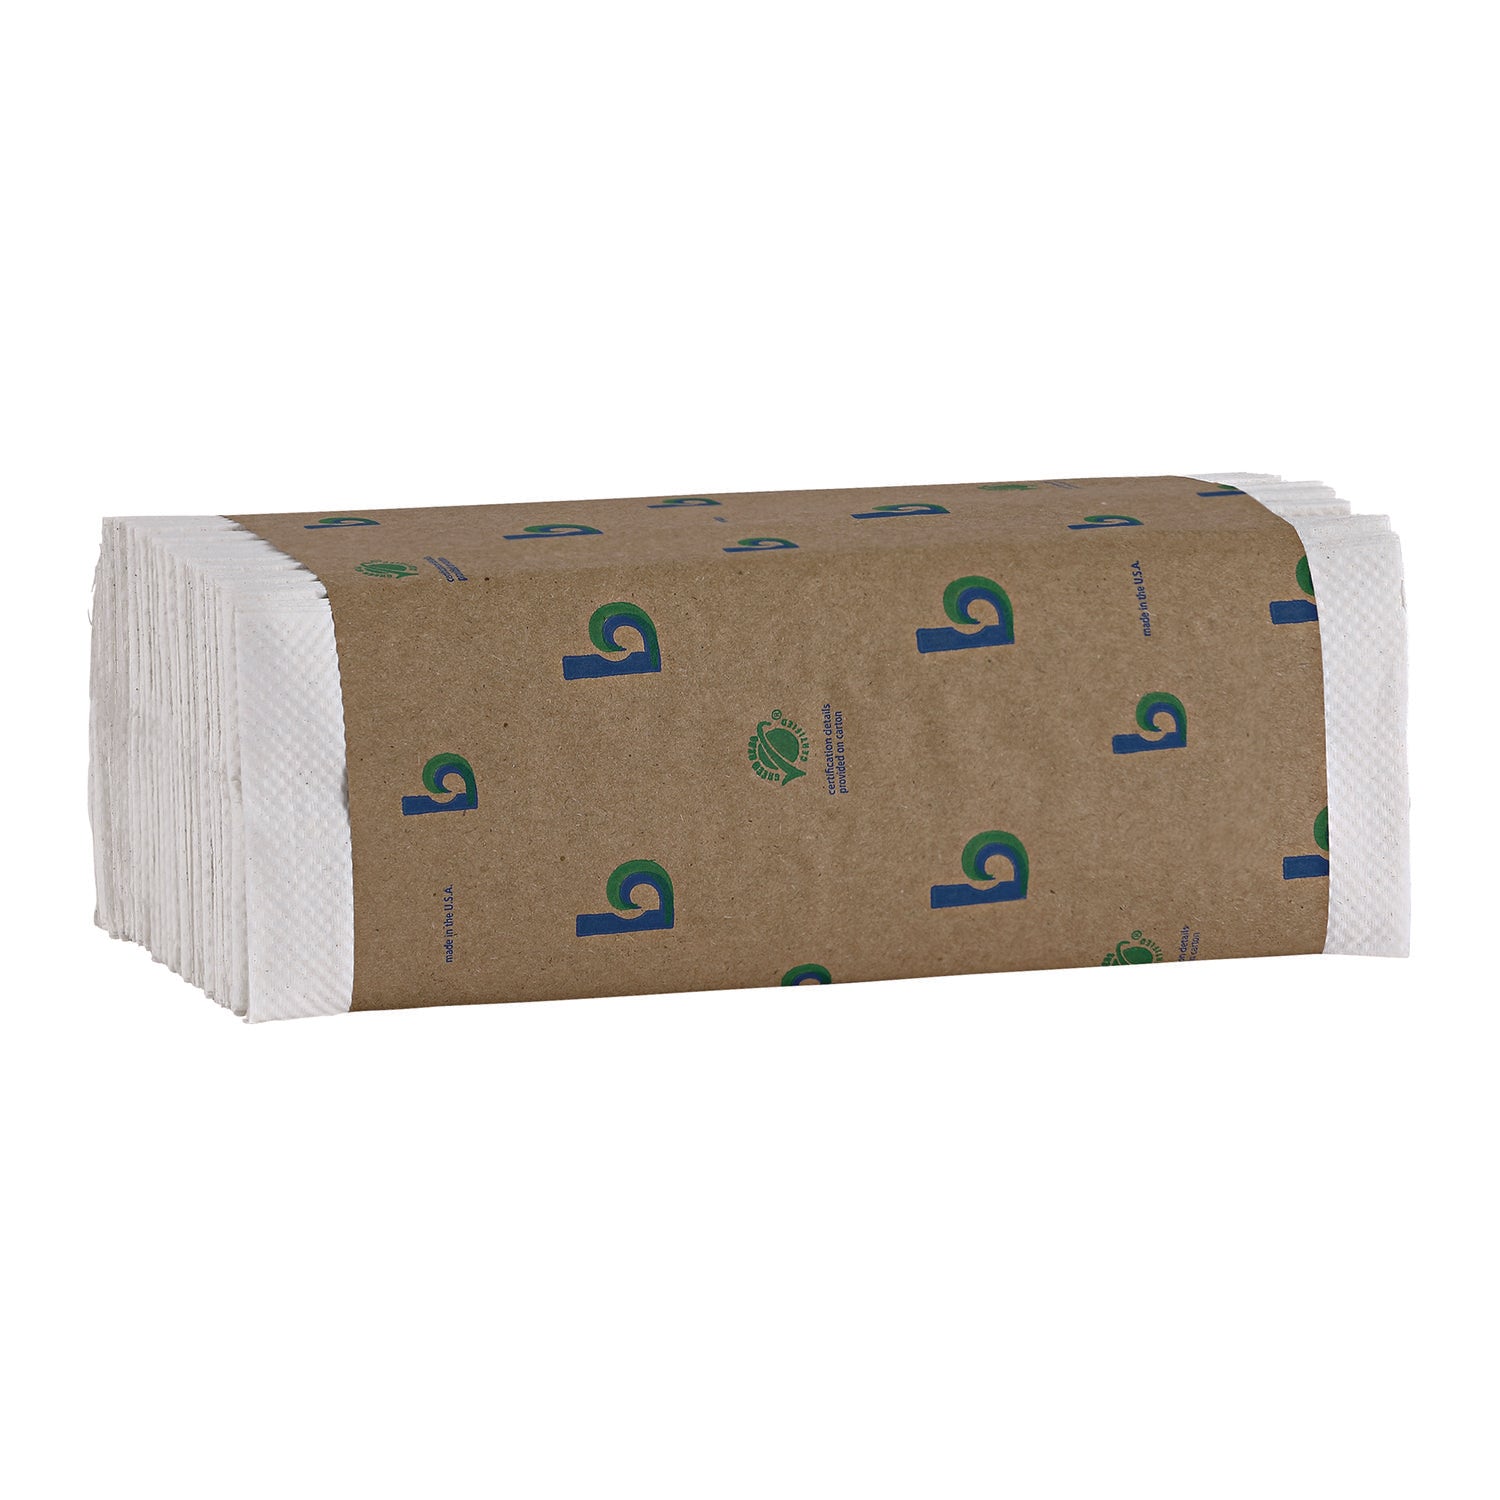 Boardwalk Green C-Fold Towels, 1-Ply, 10.13 x 12.75, Natural White, 150/Pack, 16 Packs/Carton - 2